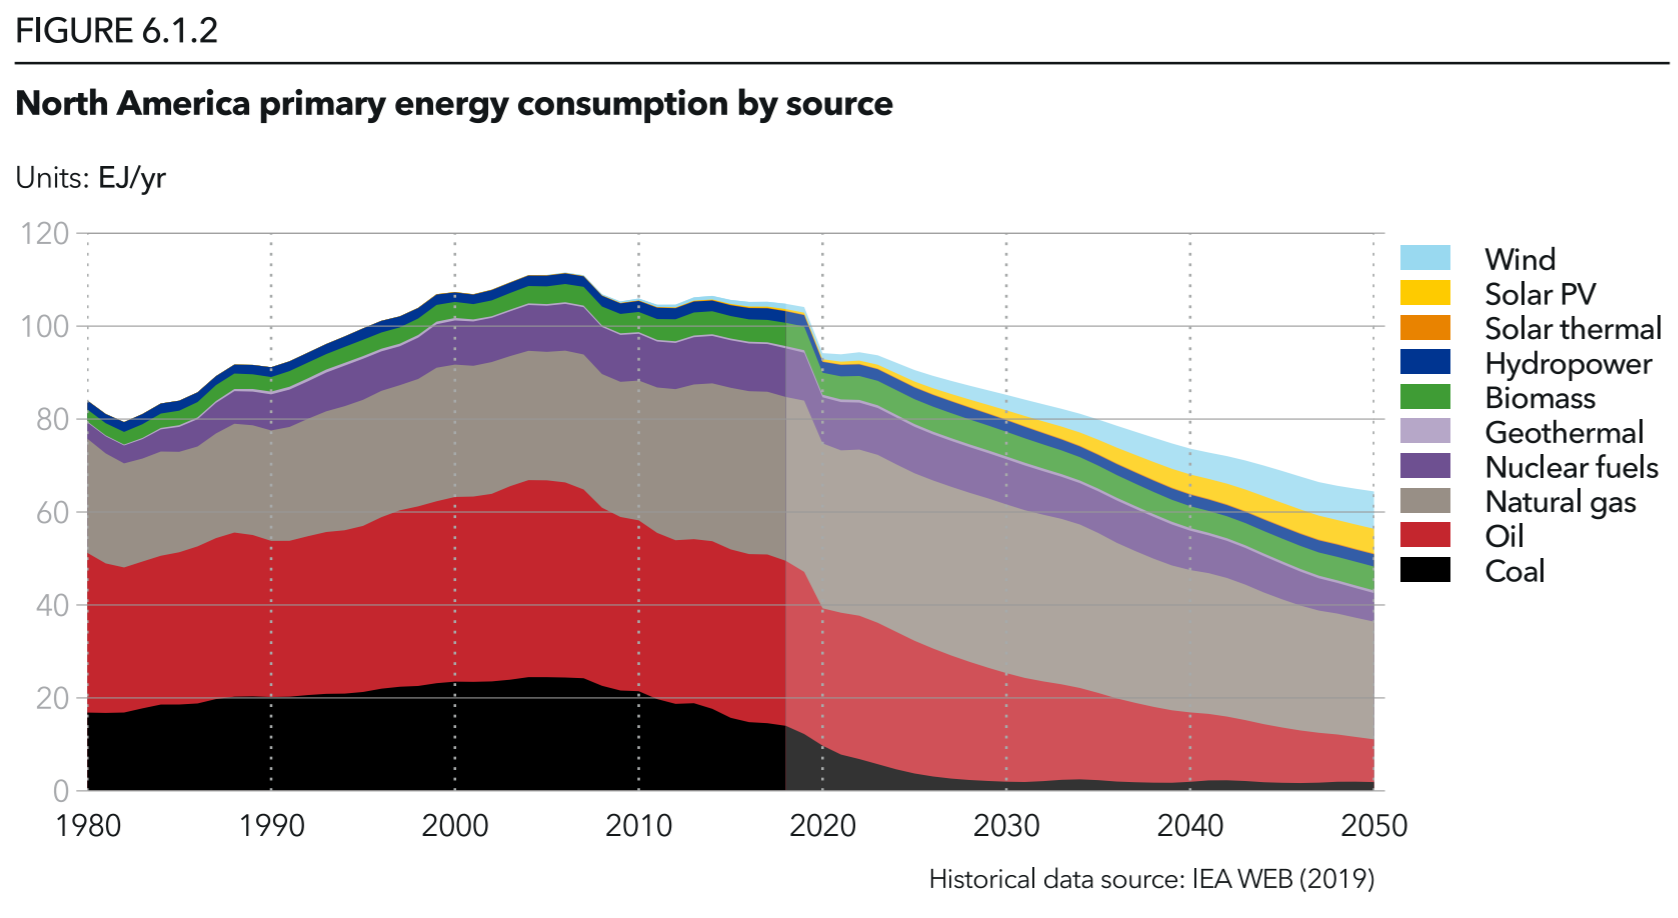 North America primary energy consumption by source